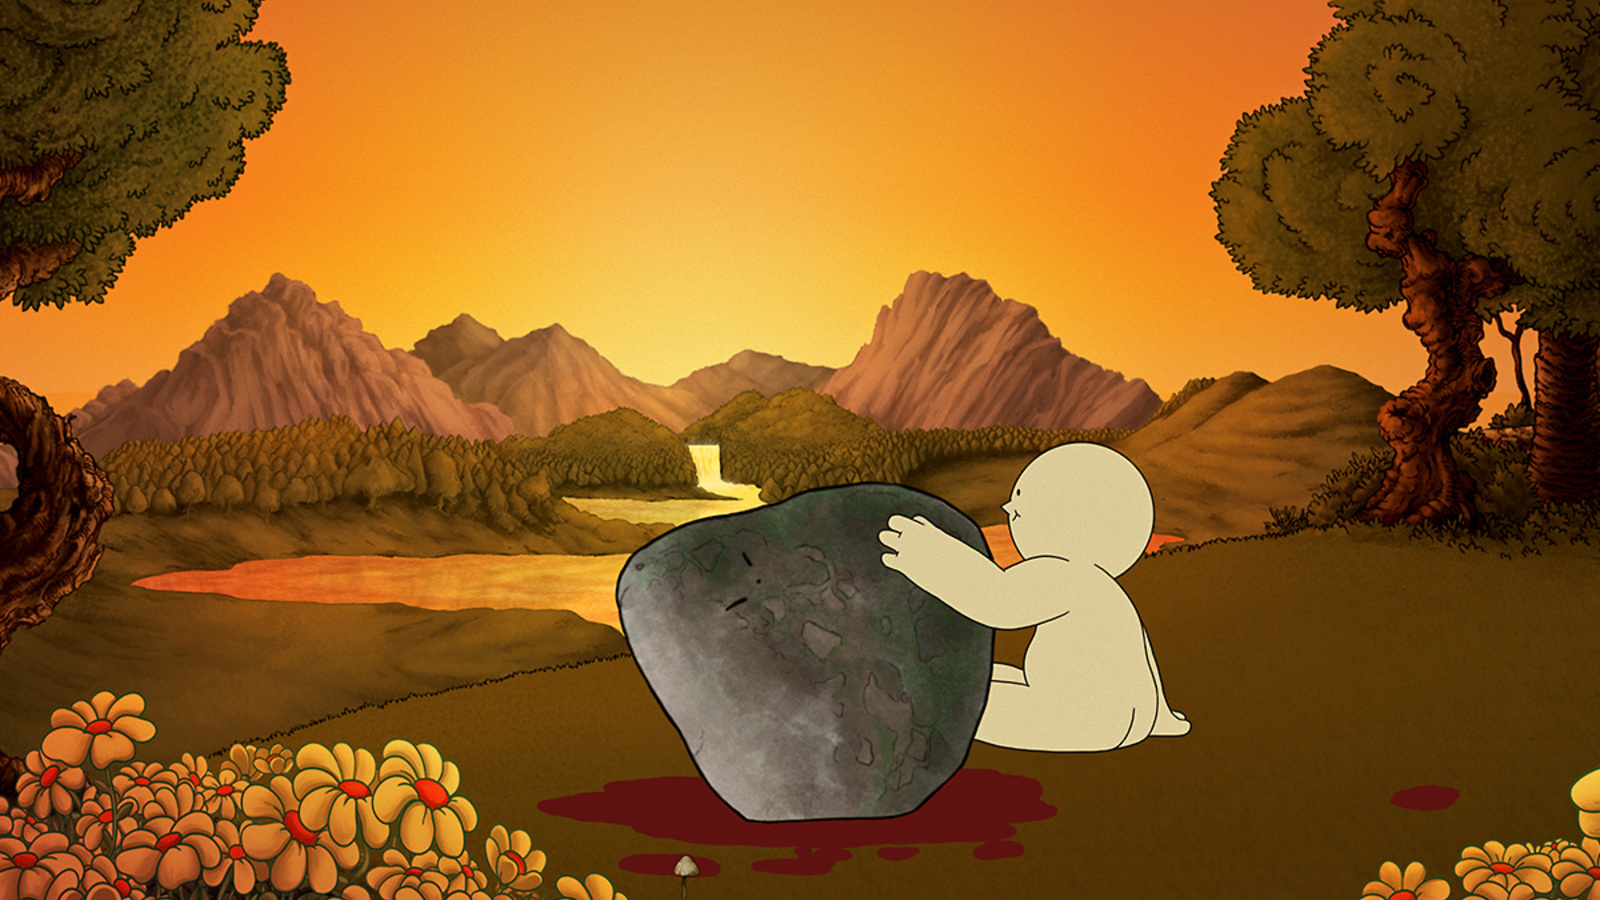 A Cutie enjoys the sunset with his arm around a blood-splattered boulder in a scene from CUTIES